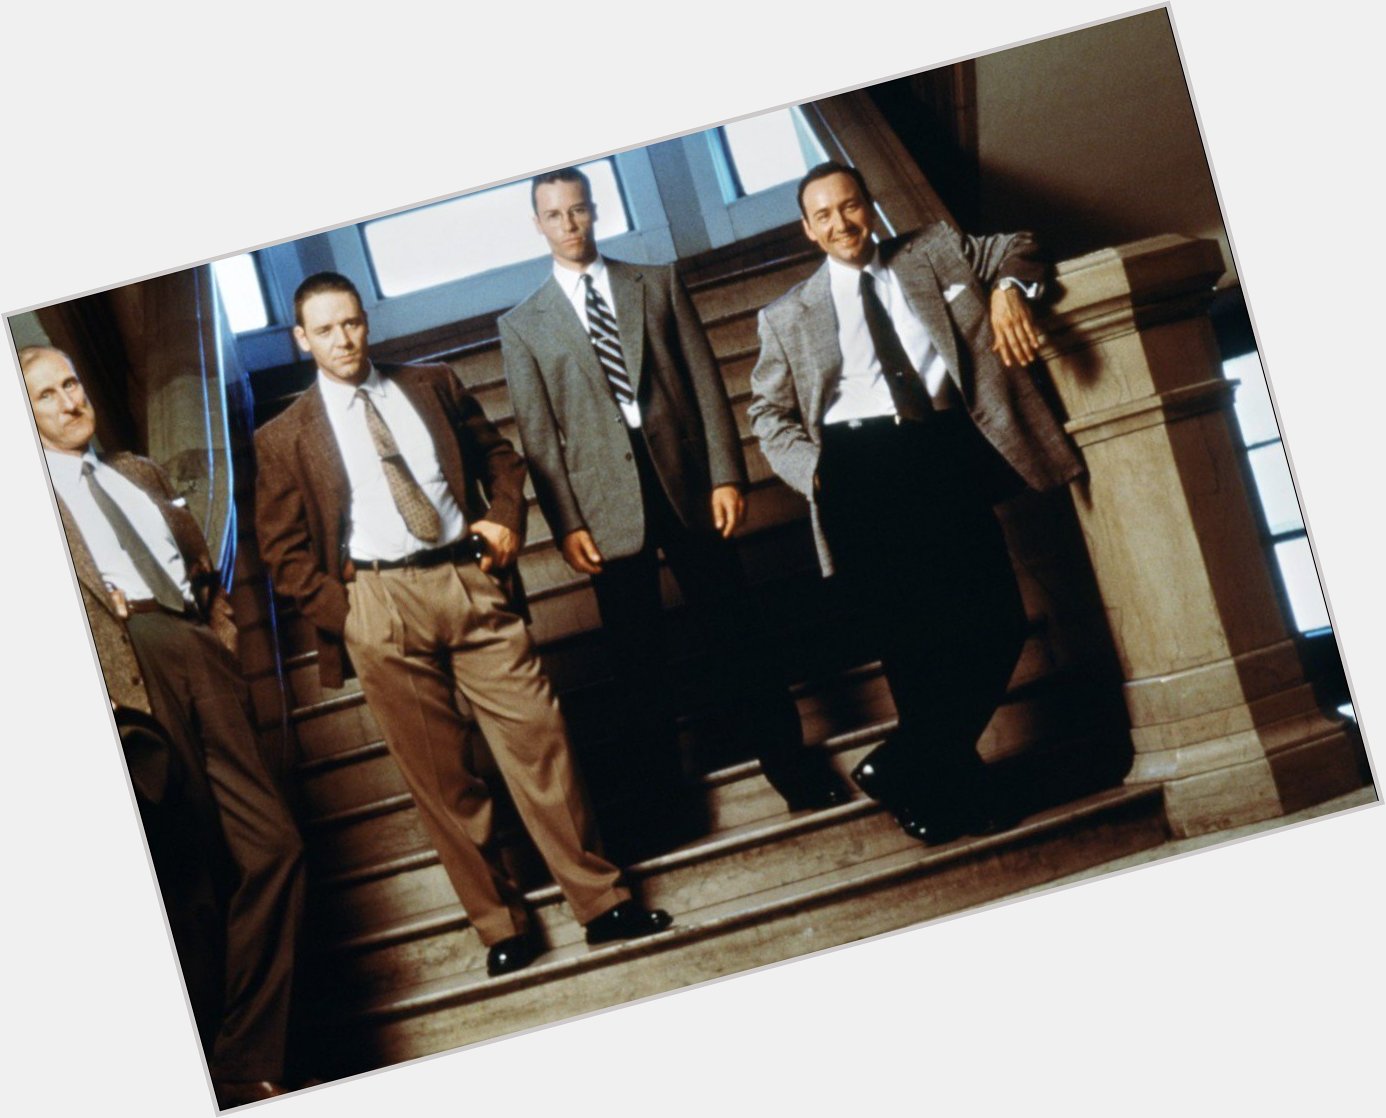 Happy 54th birthday to Russell Crowe, seen here with guys on the set of \L.A. Confidential\ (1997). 